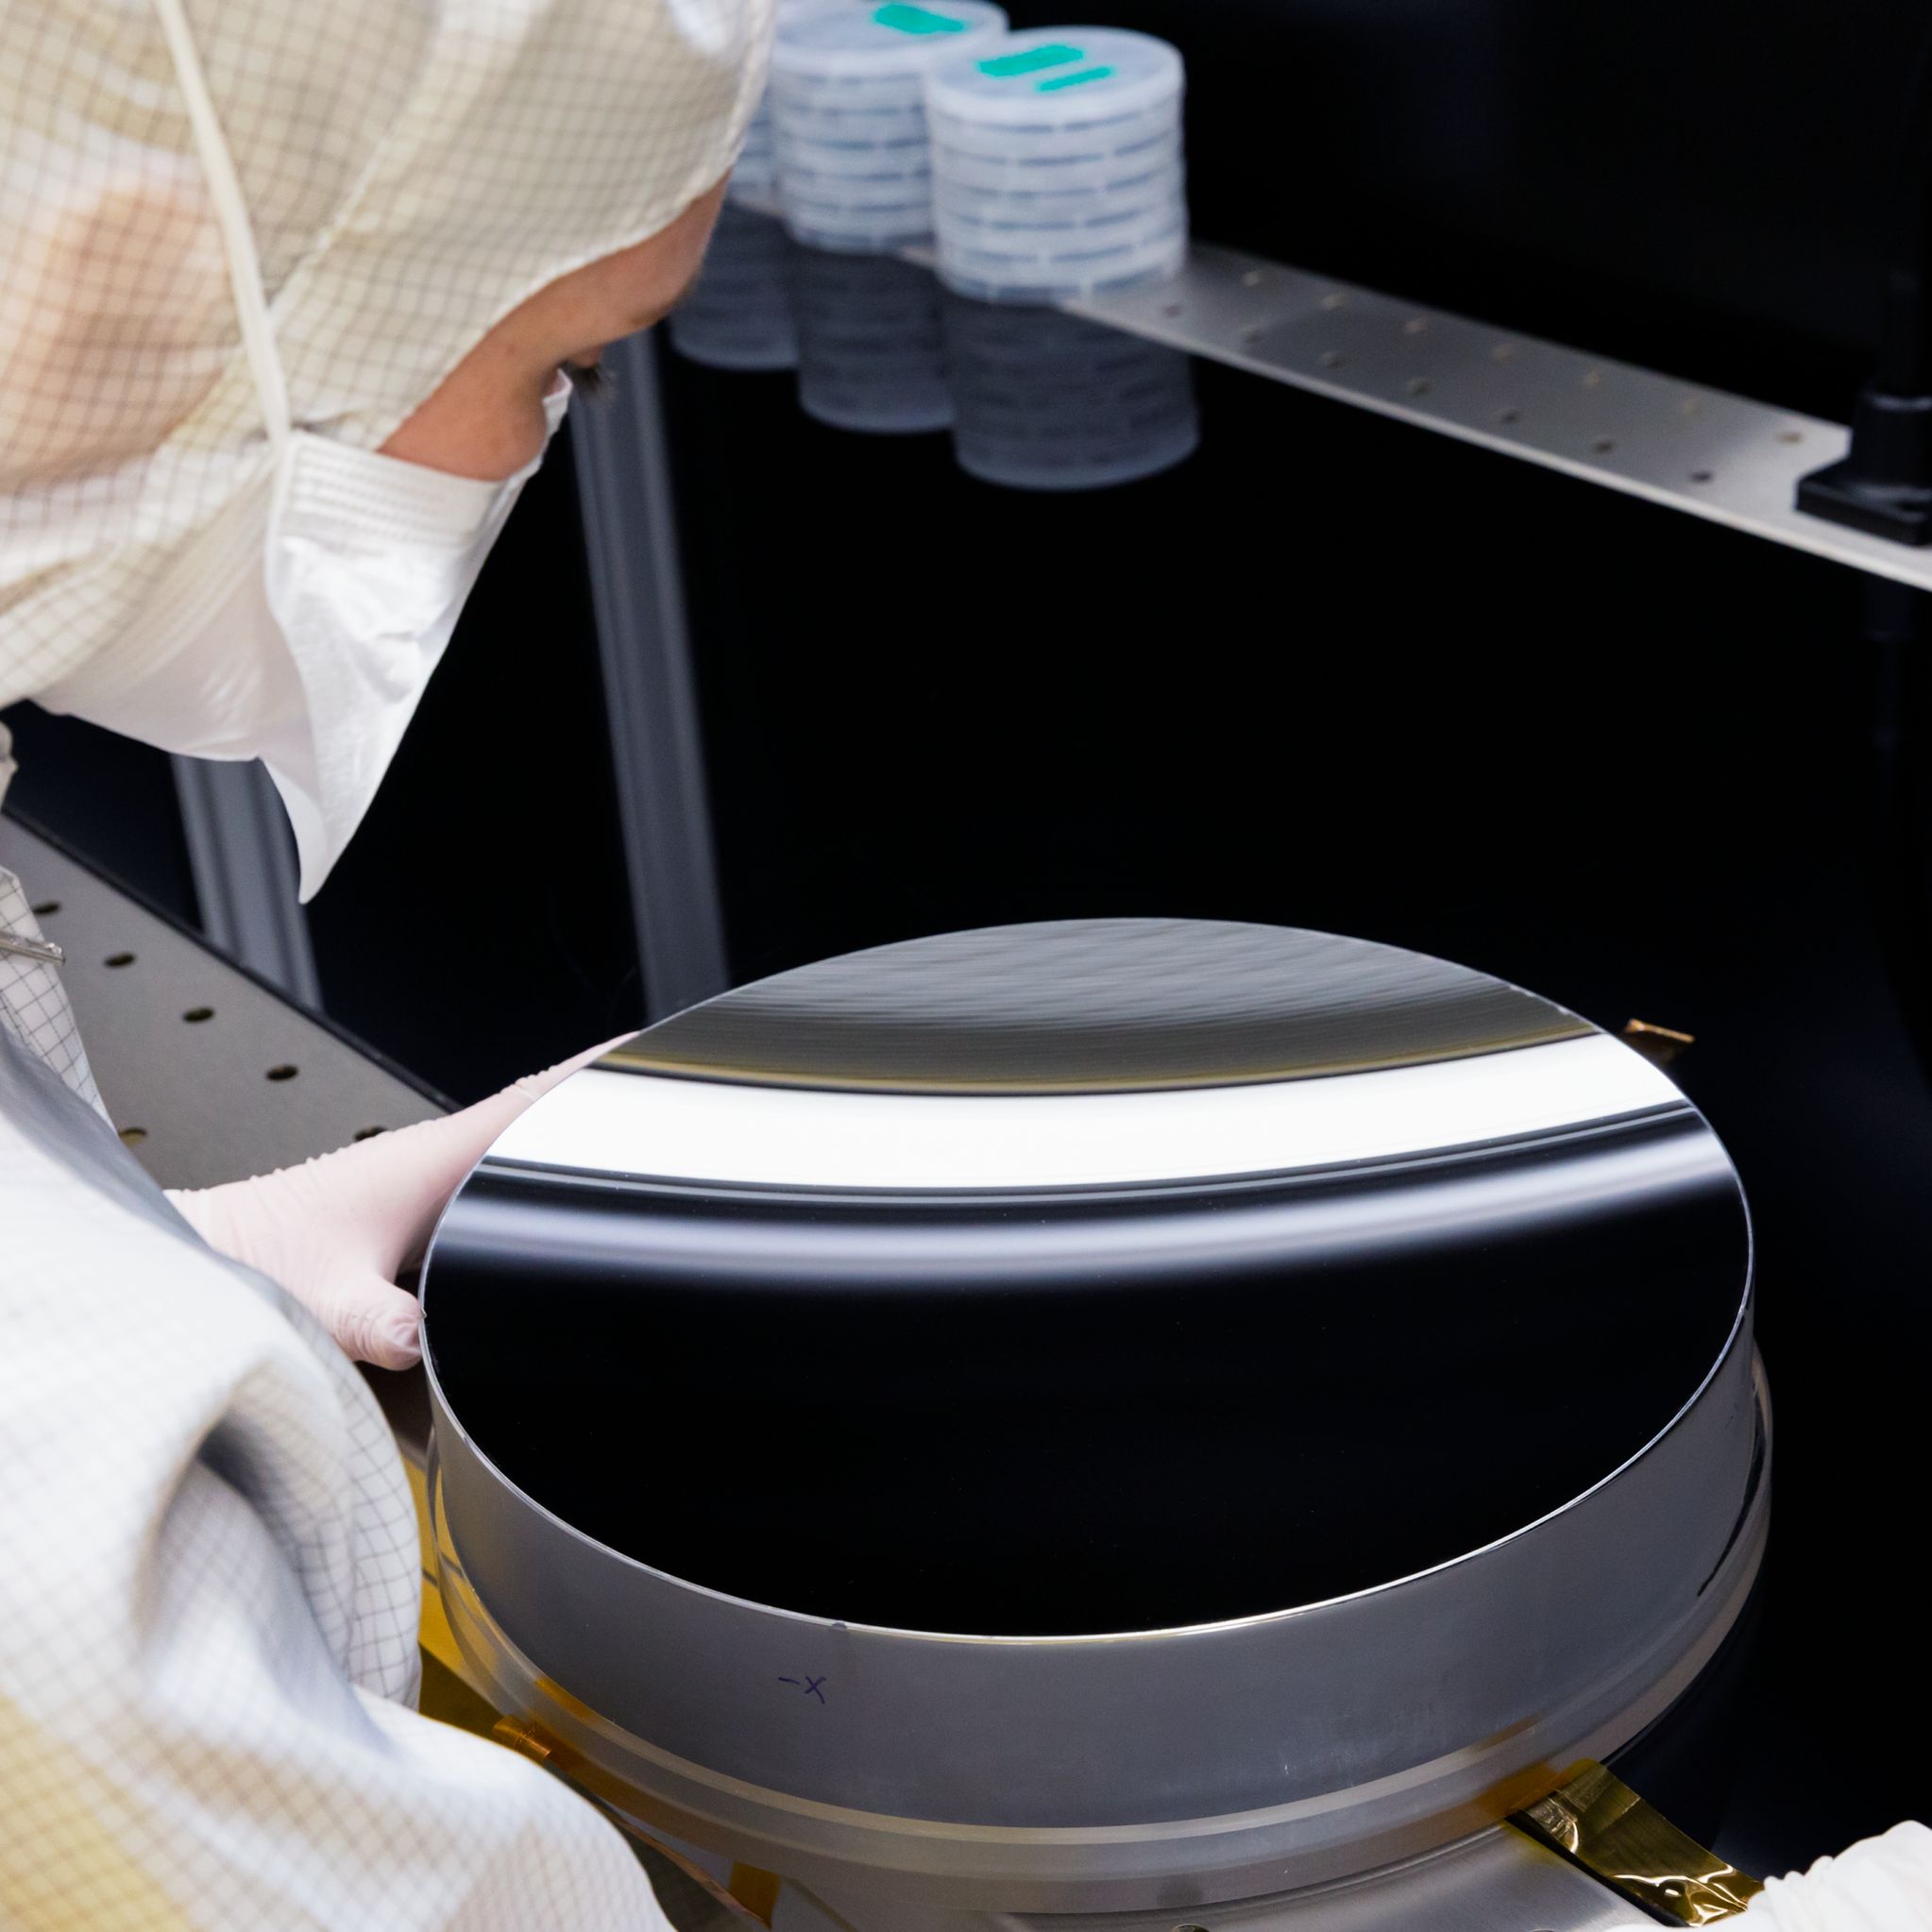 optiX fab coats the most precise mirrors in the world used in EUV lithography.